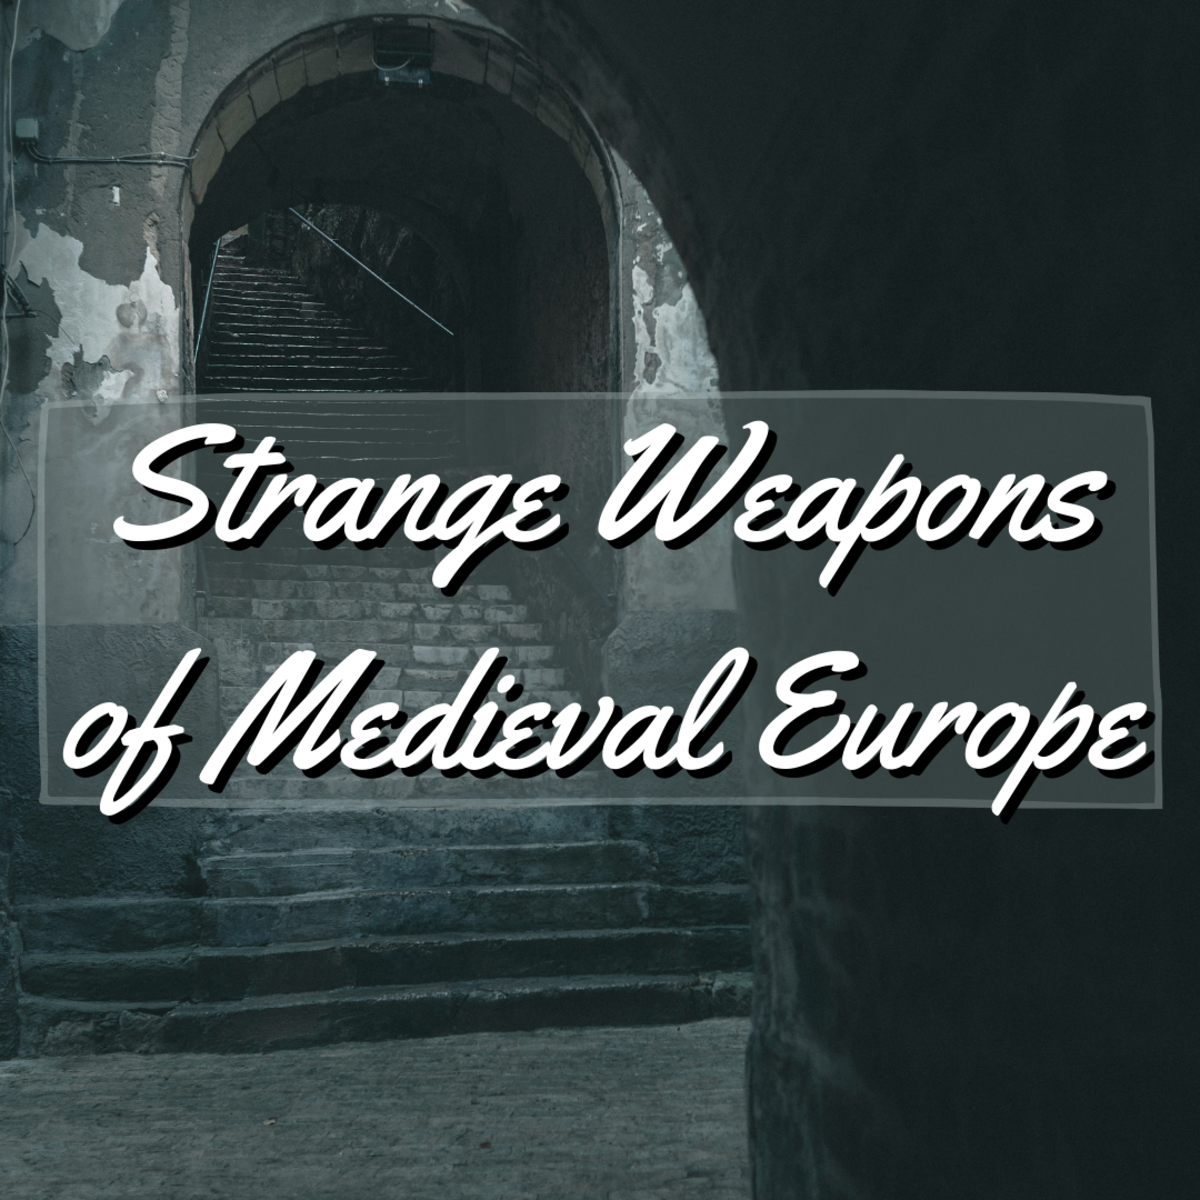 Read on to learn about some of the strangest weapons of medieval Europe, including the dueling shield.